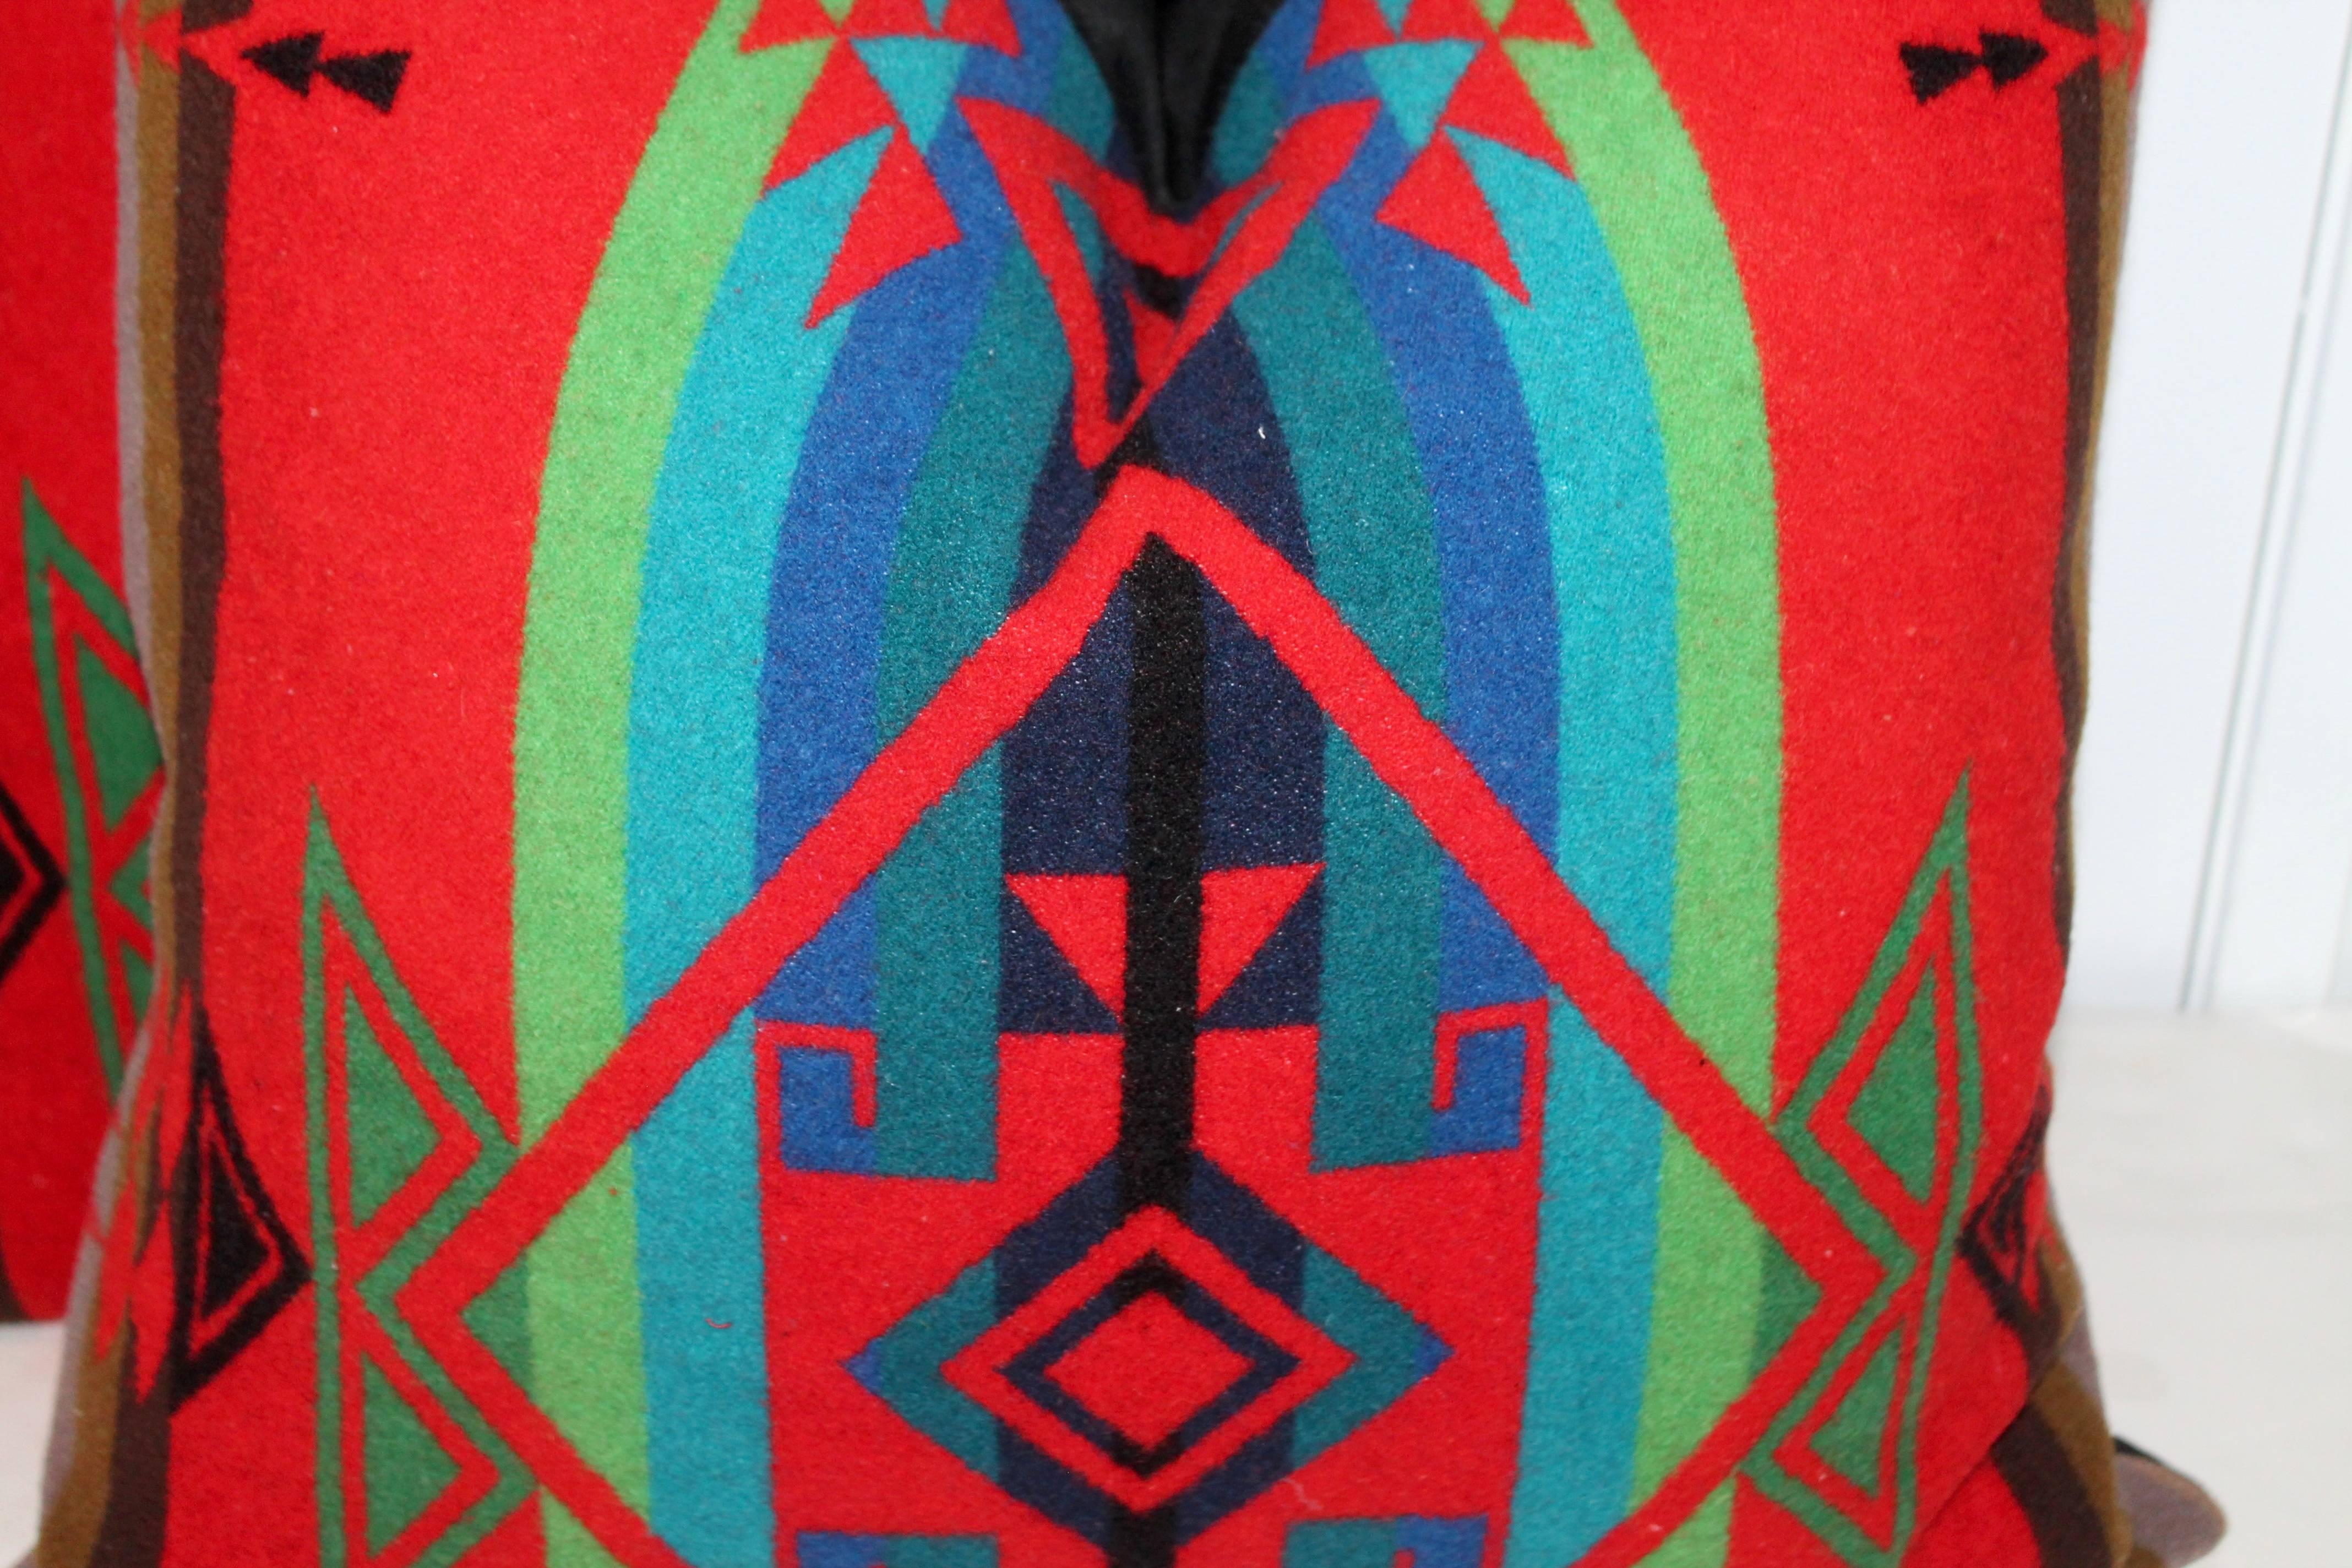 These amazing Pendleton Indian patterned camp blanket pillows are in pristine condition. The backing is in black cotton linen and down and feather fill. There are two pairs in stock.